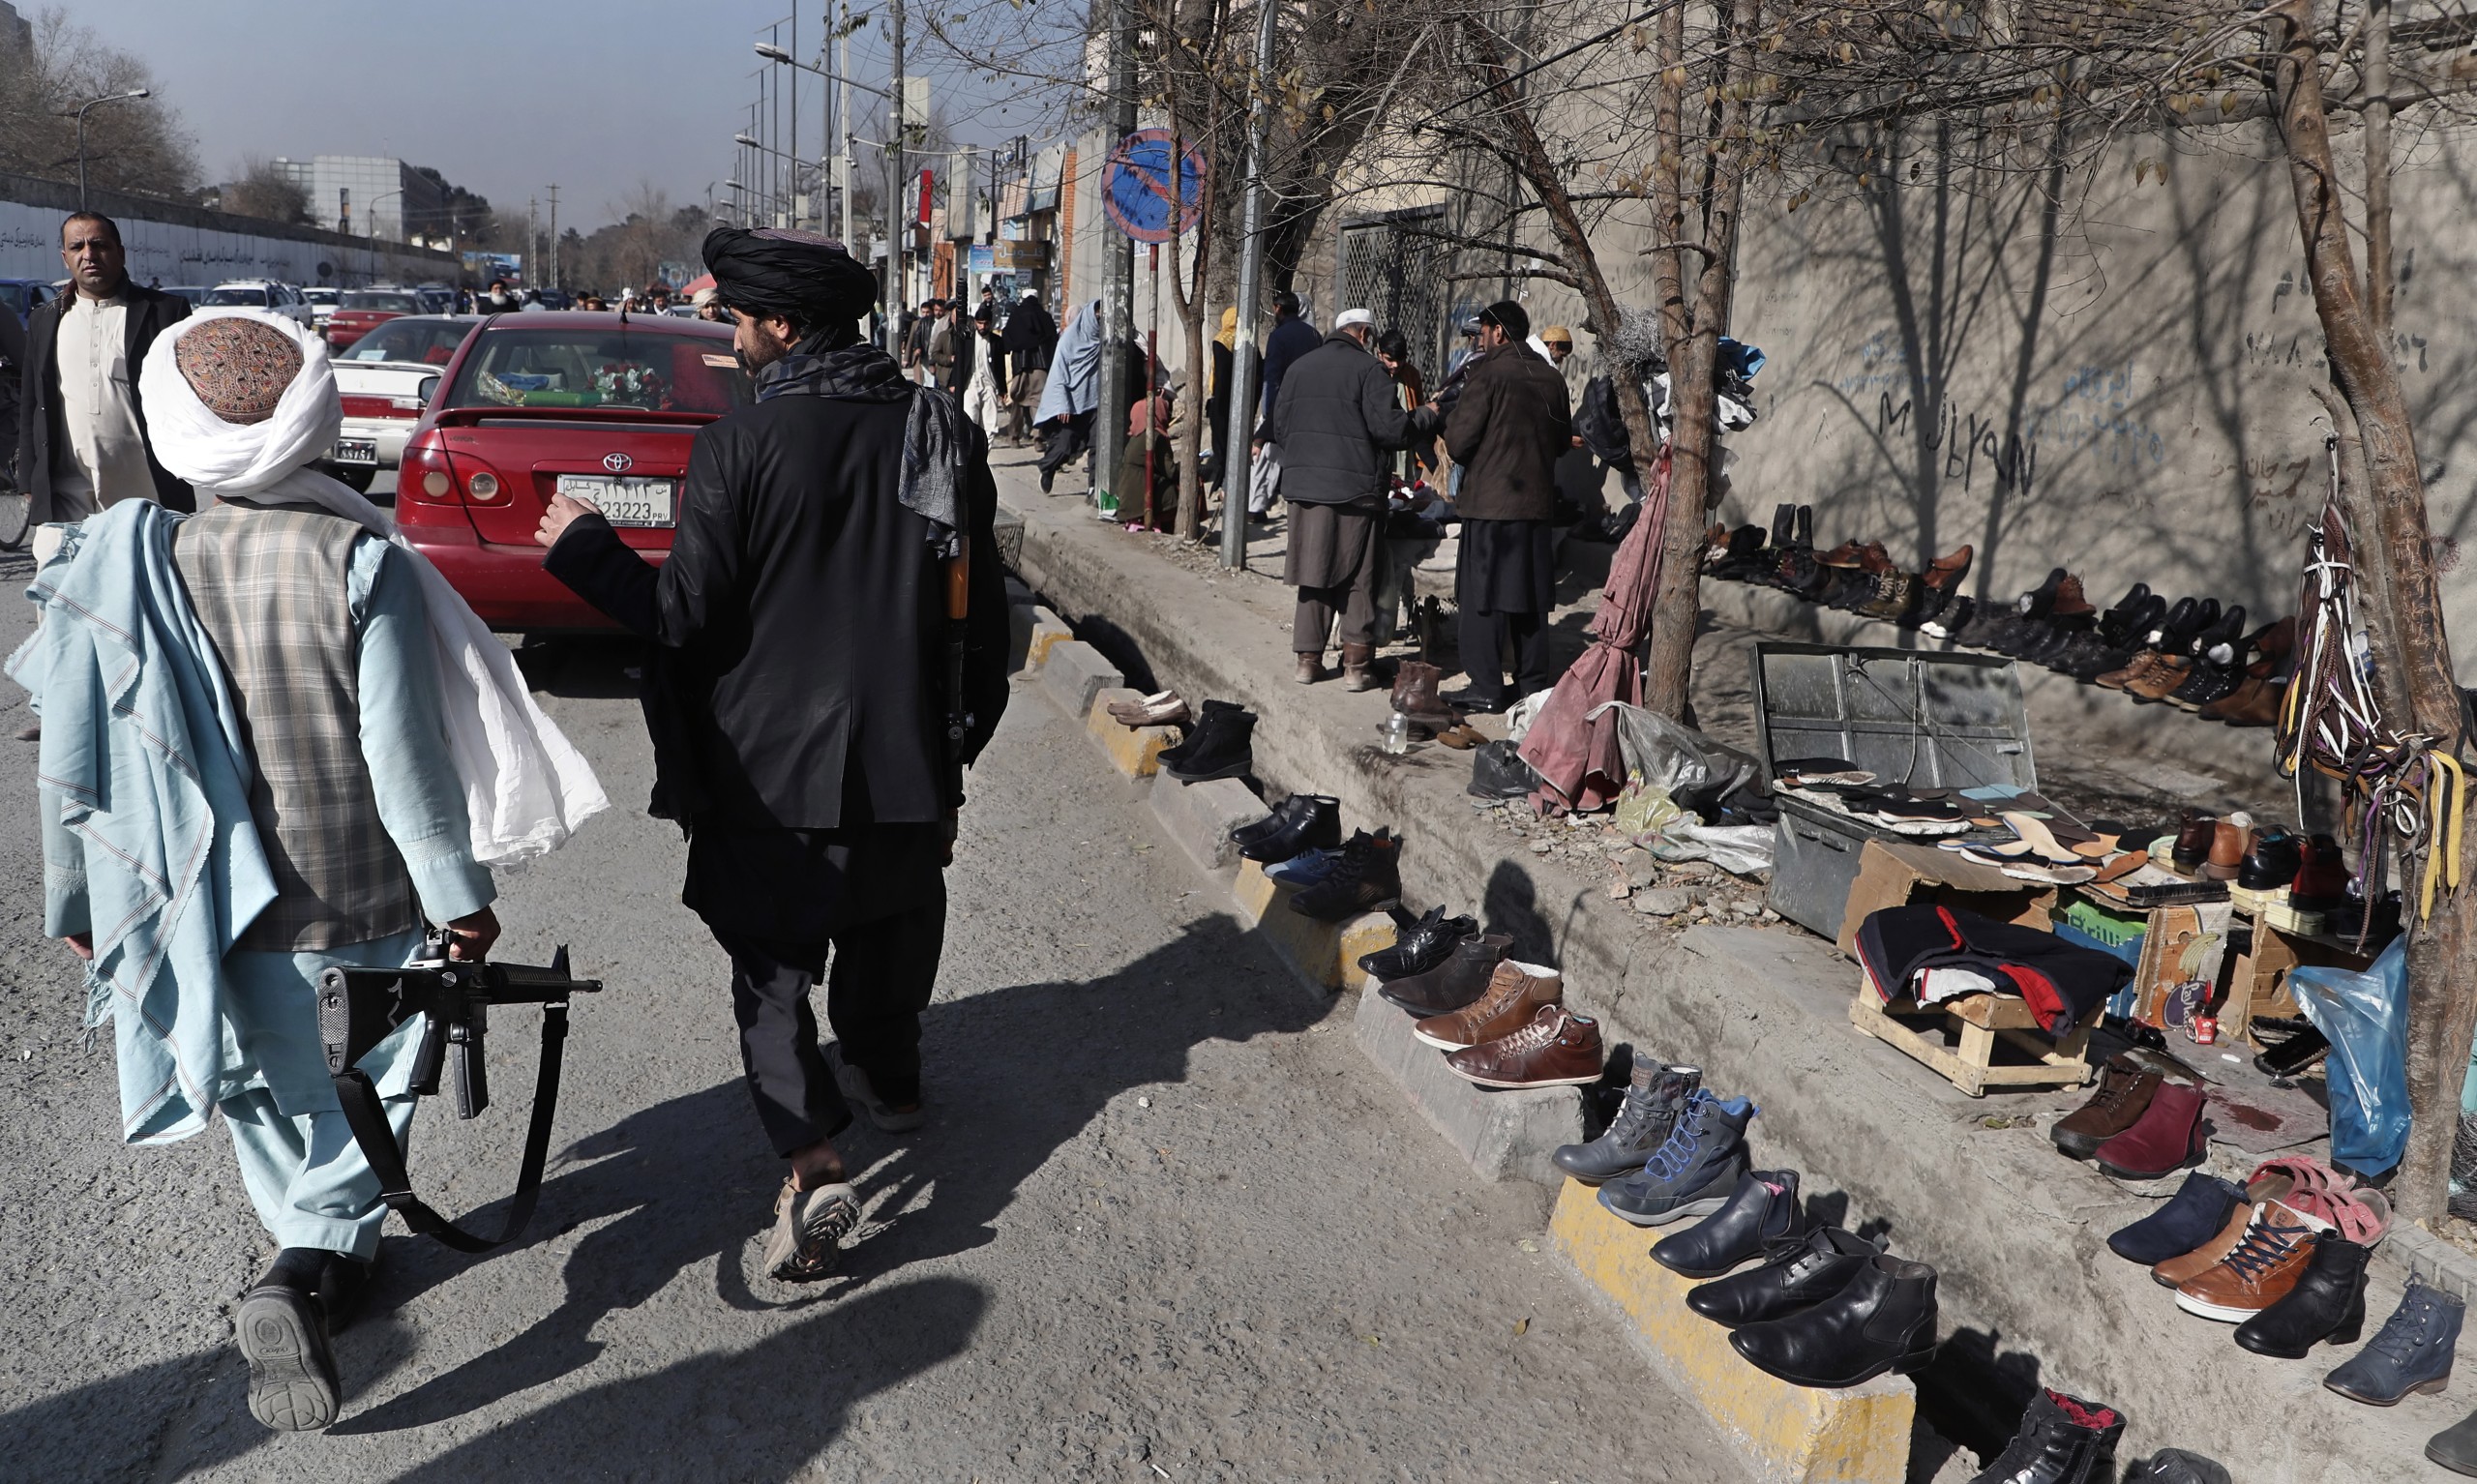 epa09638702 Taliban members patrol a second-hand shoes street market as seller waits for customers in downtown Kabul, Afghanistan, 12 December 2021. The Taliban has said that the United Nations should help them in assisting nearly 3.5 million Afghans return to their homes after having been displaced inside the country due to violence.  EPA/MAXIM SHIPENKOV